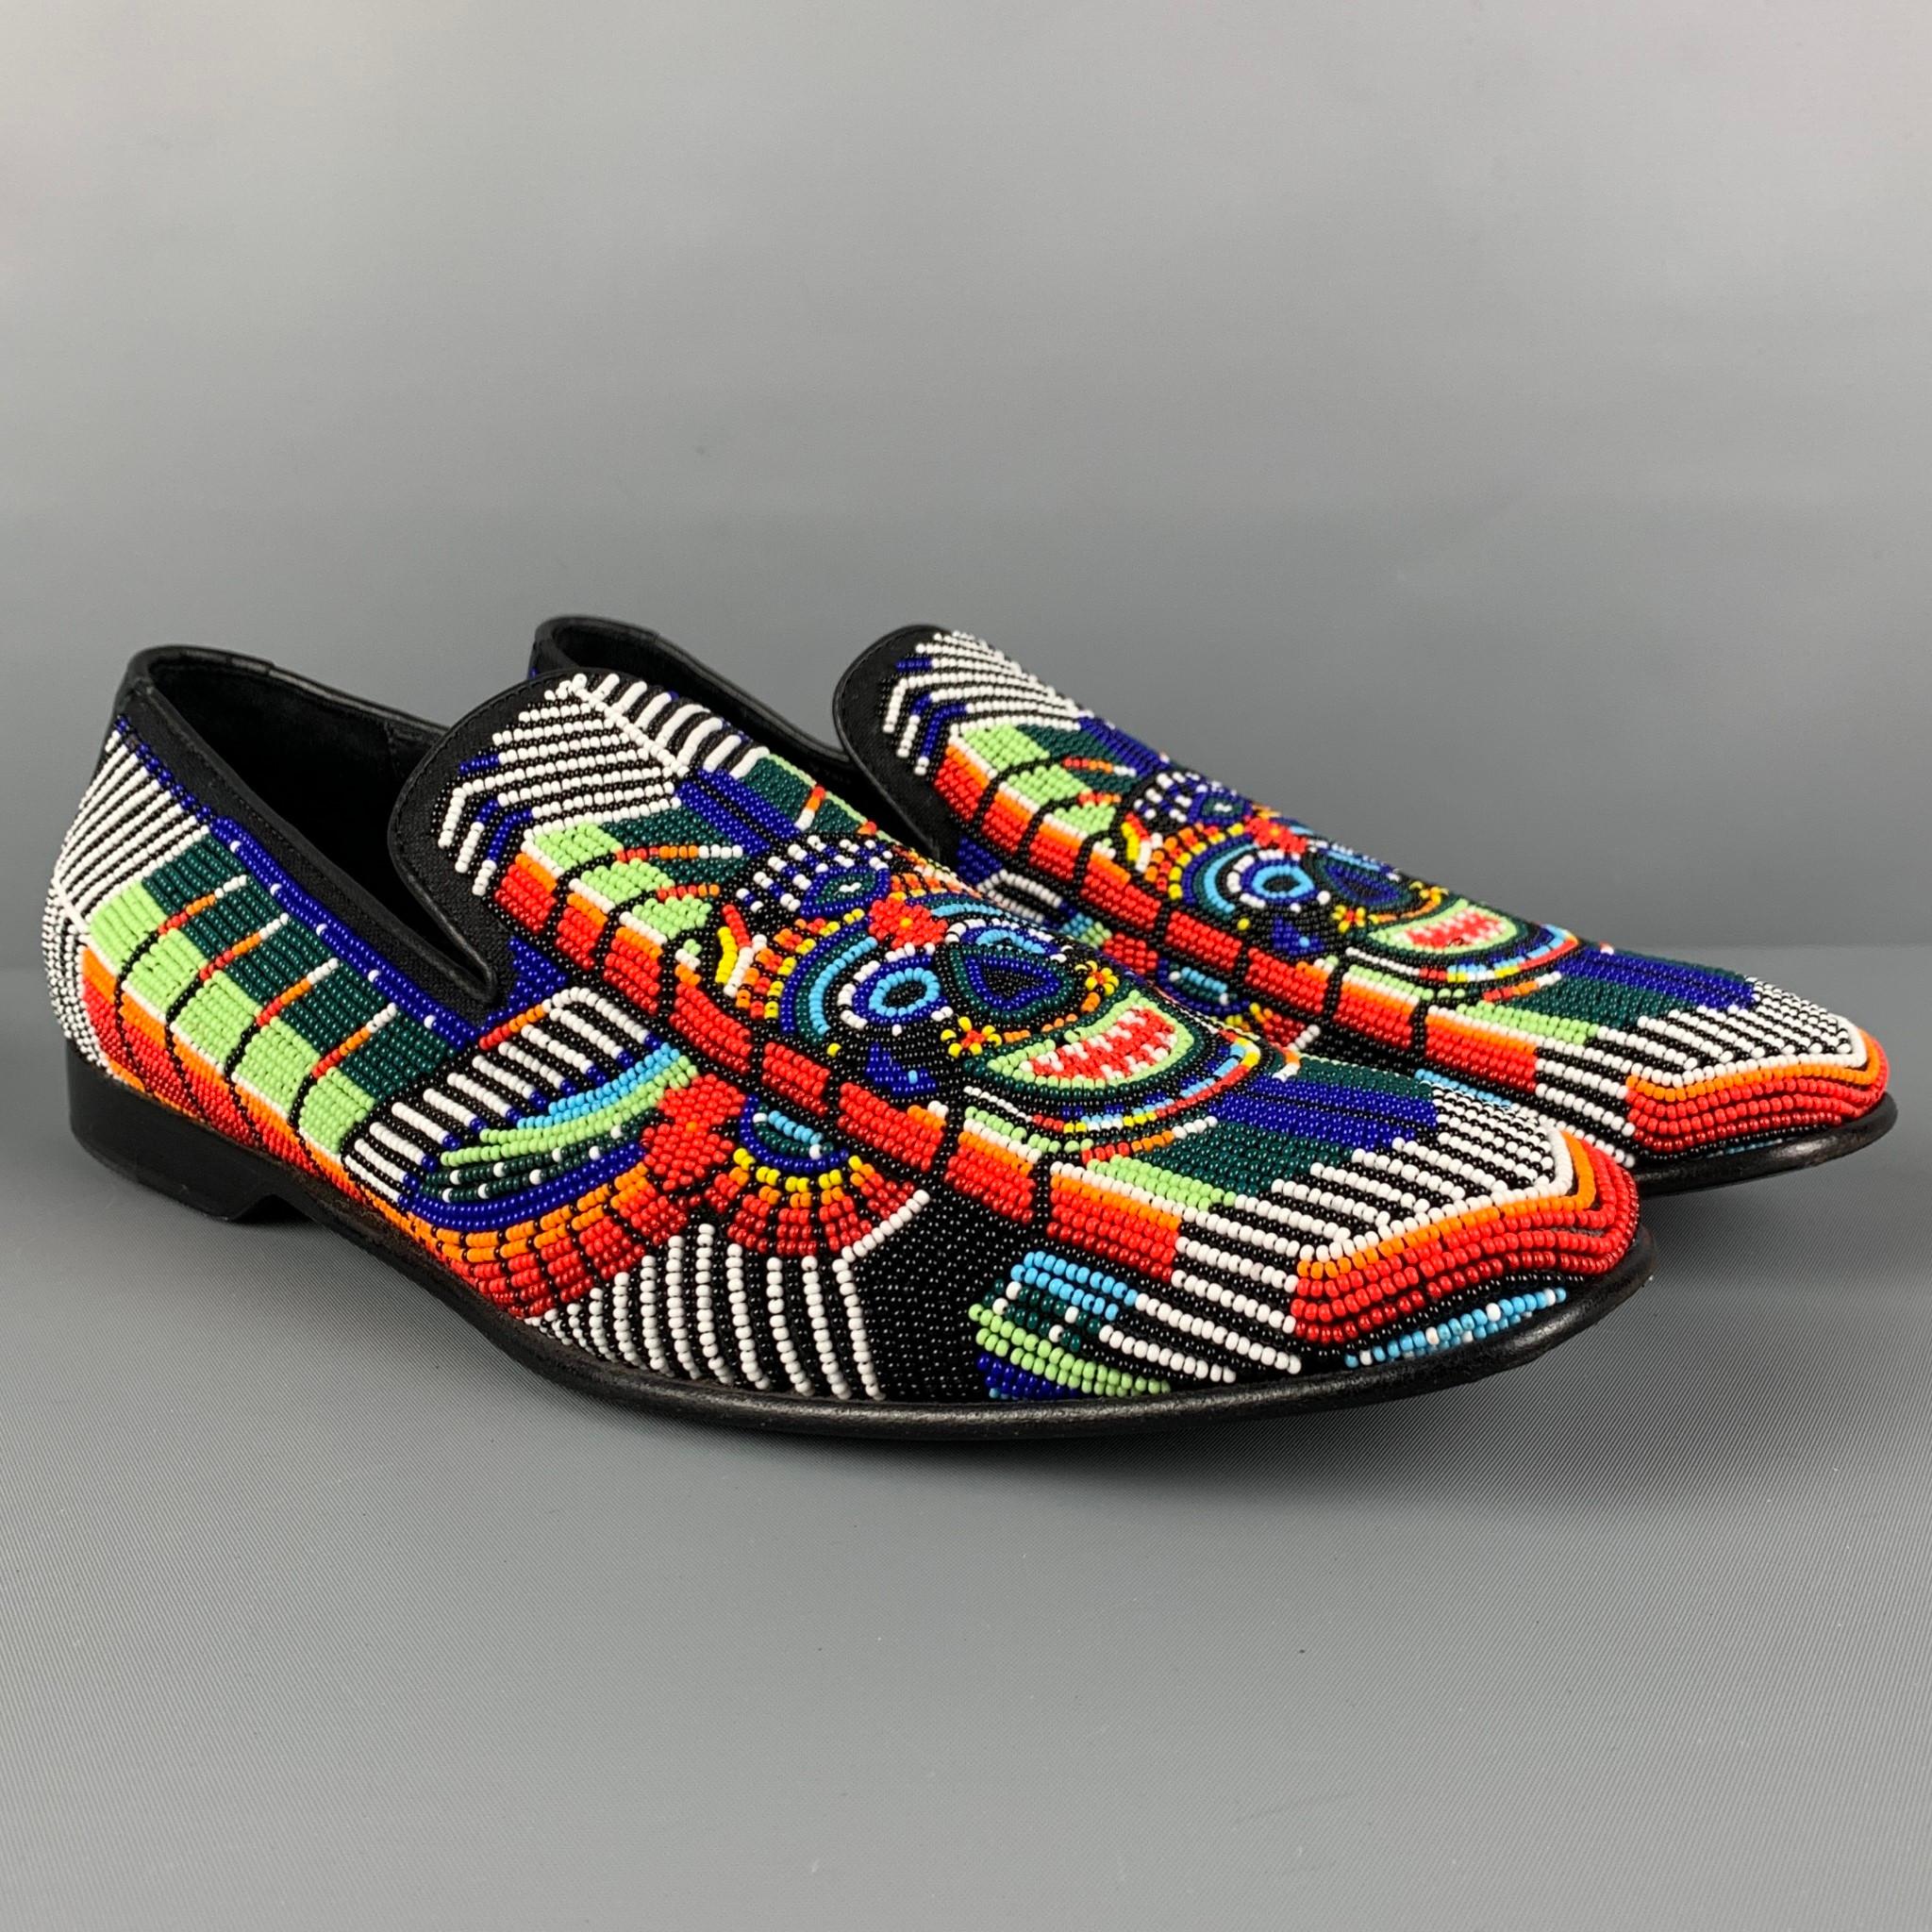 DONALD J PLINER SIGNATURE loafers comes in a multi-color beaded leather featuring a slip on style and a square toe. Made in Italy. 

Excellent Pre-Owned Condition.
Marked: 9.5 M

Outsole: 12 in. x 4 in. 

